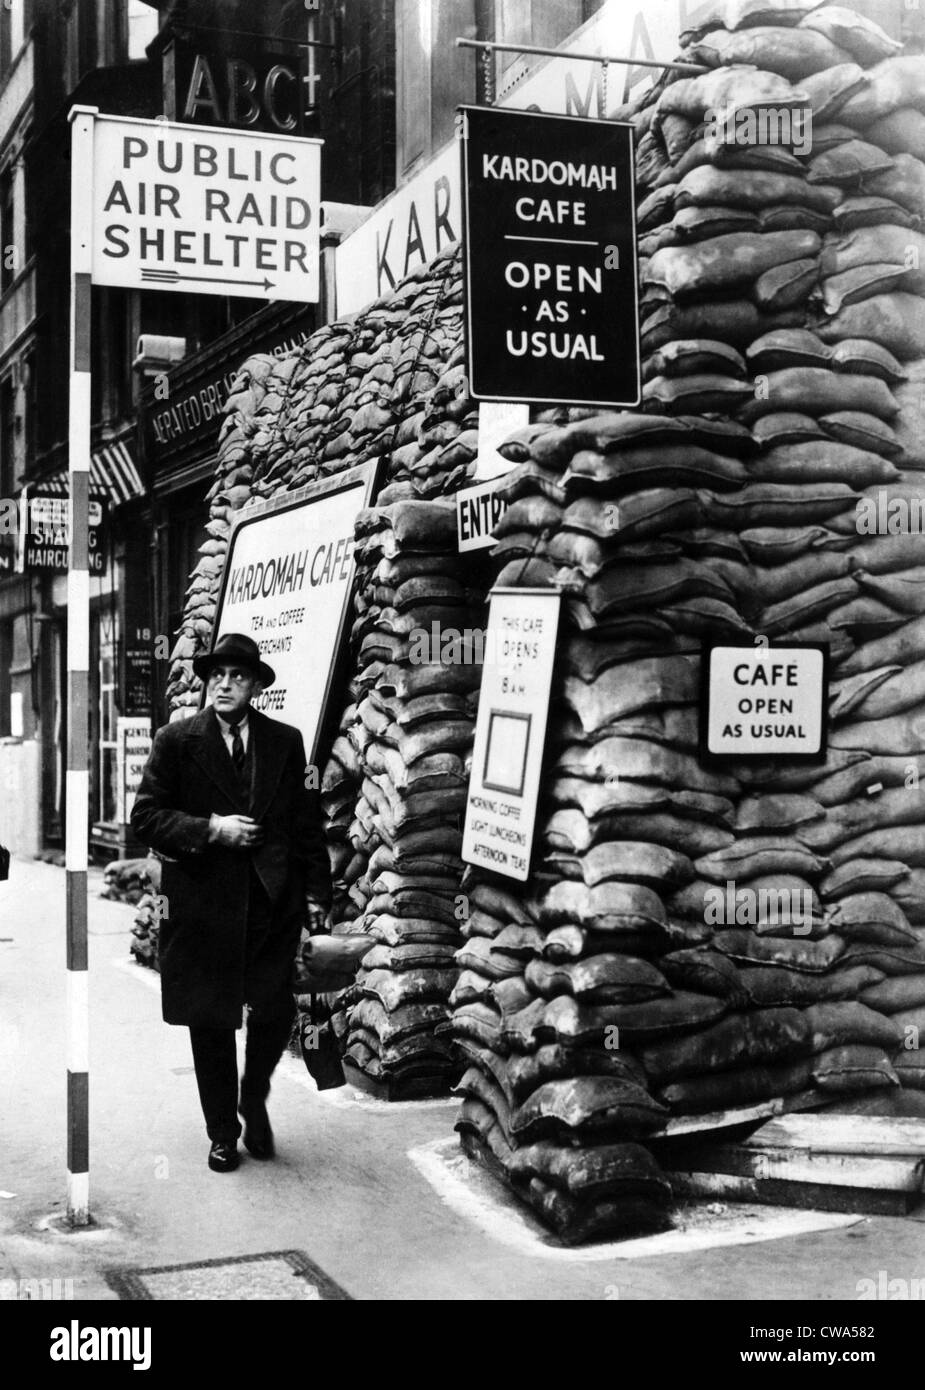 The Kardomah Cafe, outfitted as an air raid shelter as an attraction during wartime, Fleet St, London, England, November 15, Stock Photo